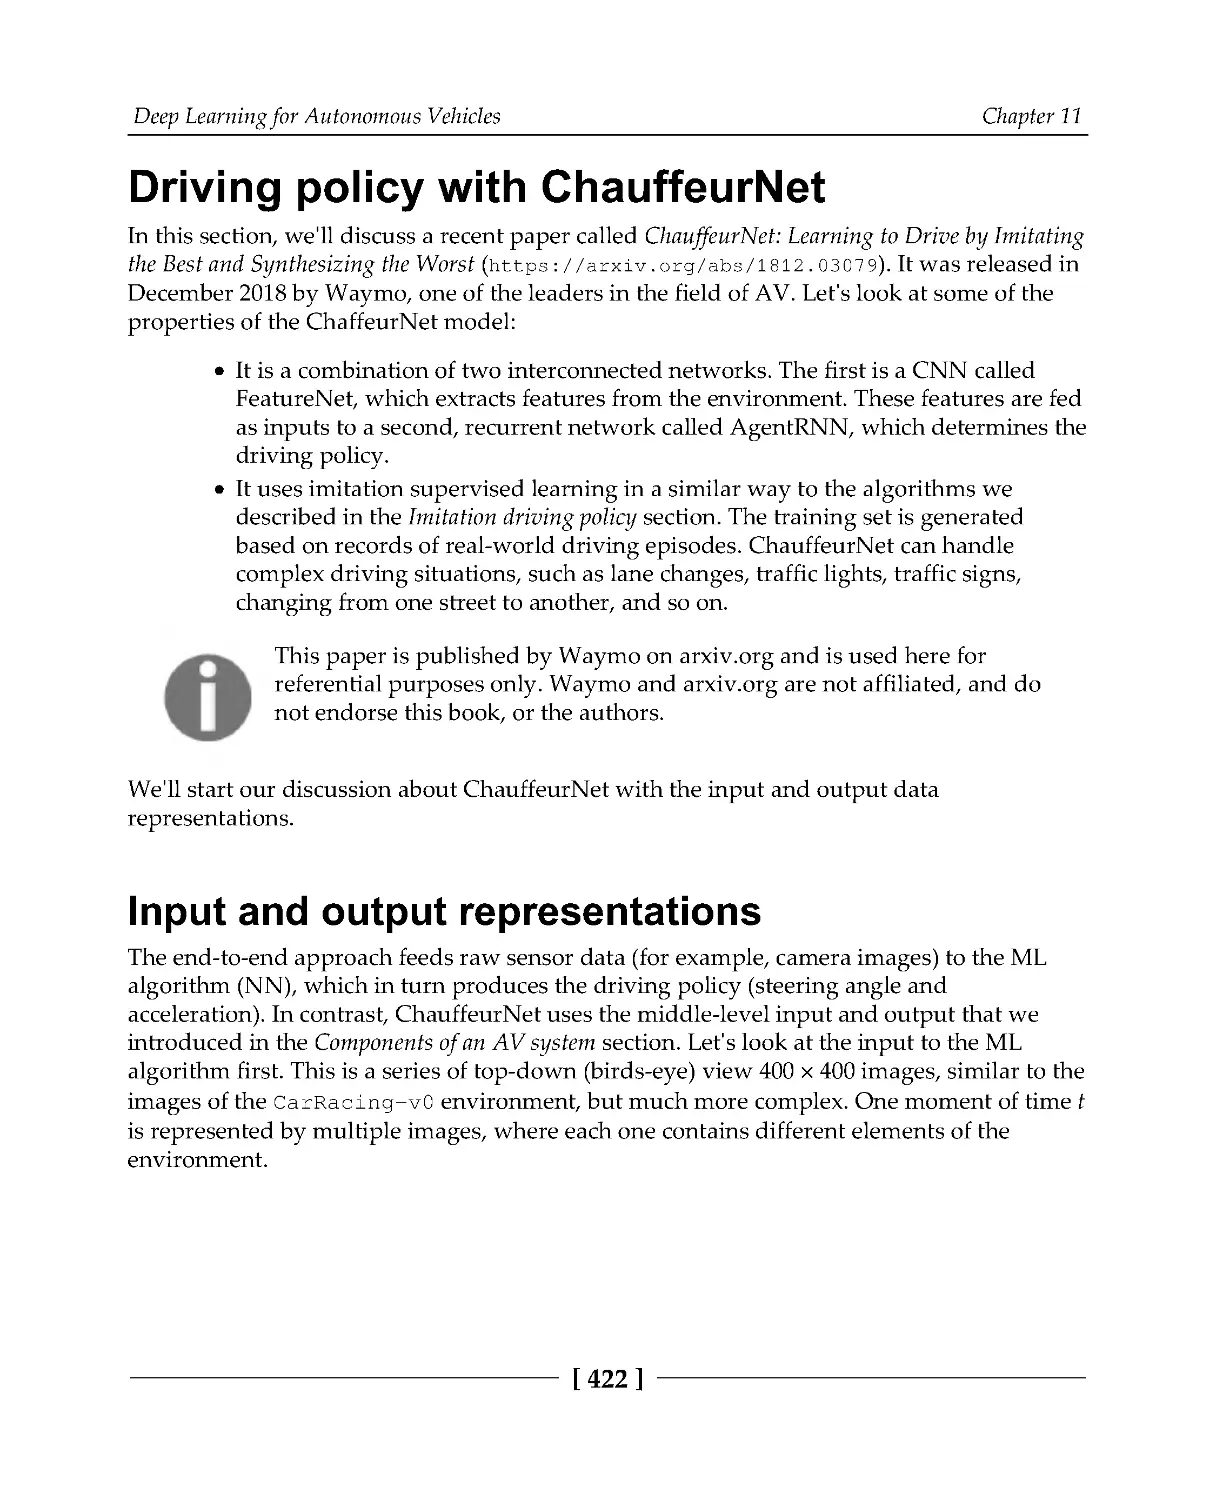 Driving policy with ChauffeurNet